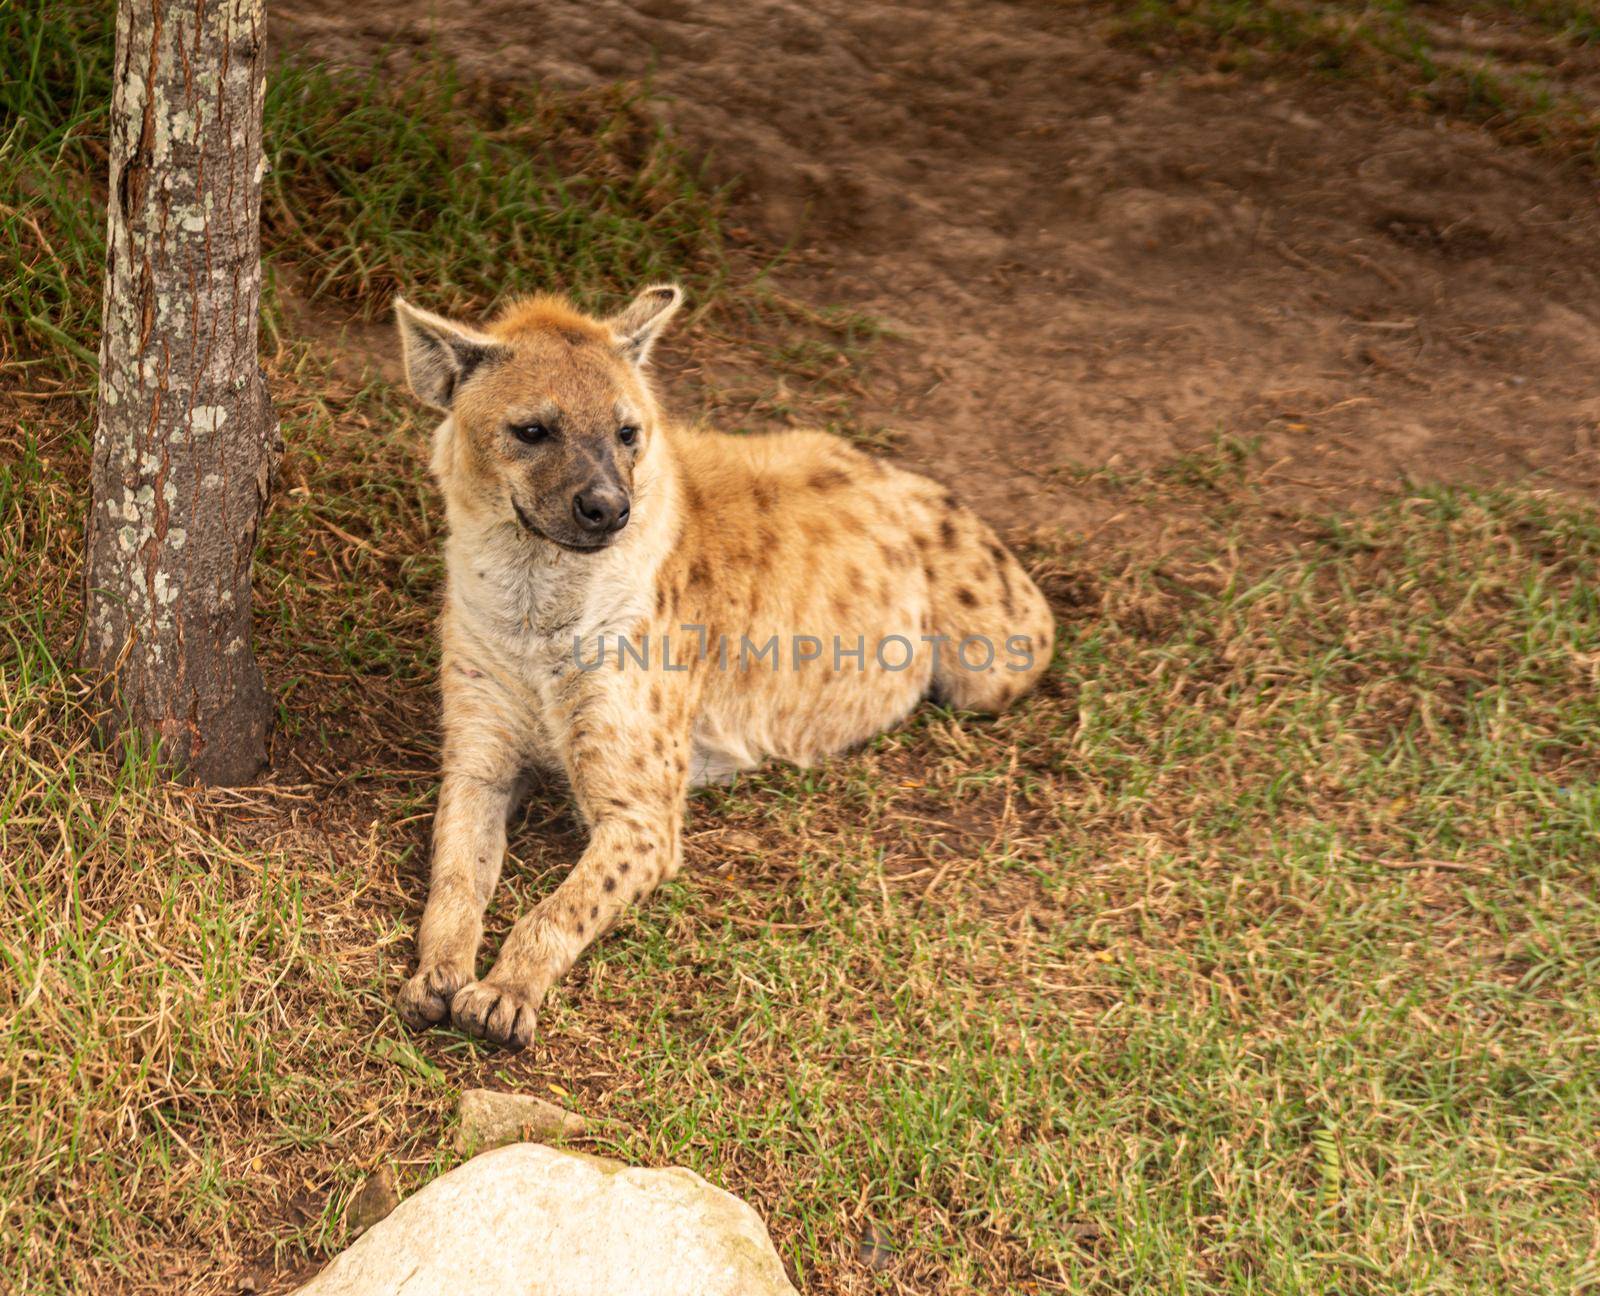 Spotted hyena also known as the laughing hyena.